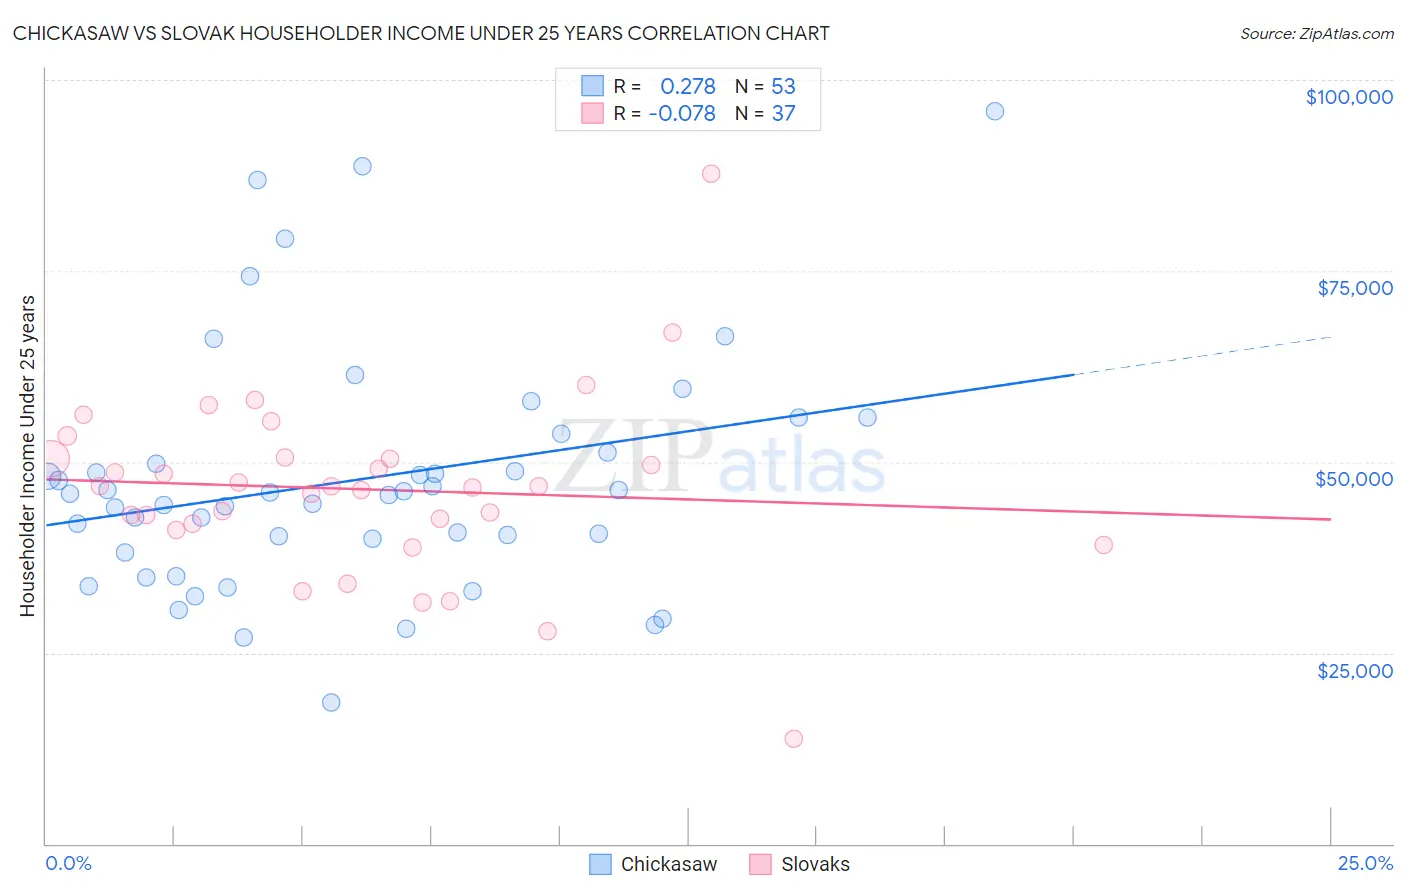 Chickasaw vs Slovak Householder Income Under 25 years